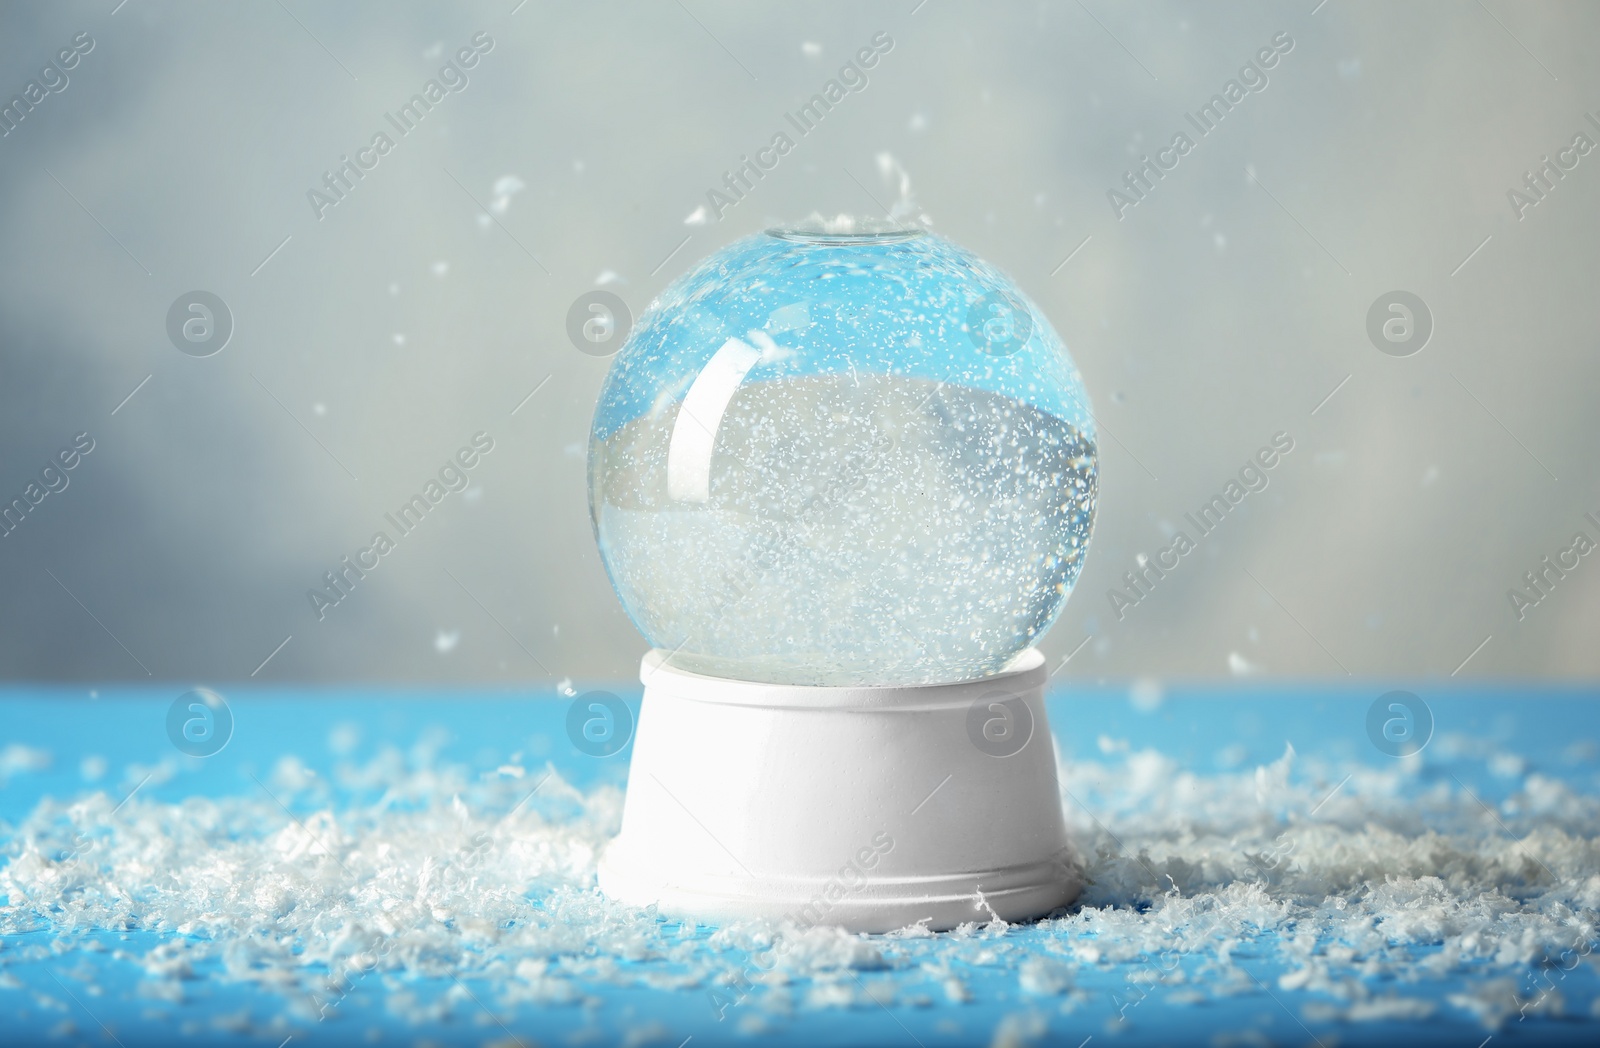 Photo of Magical empty snow globe on table against light background